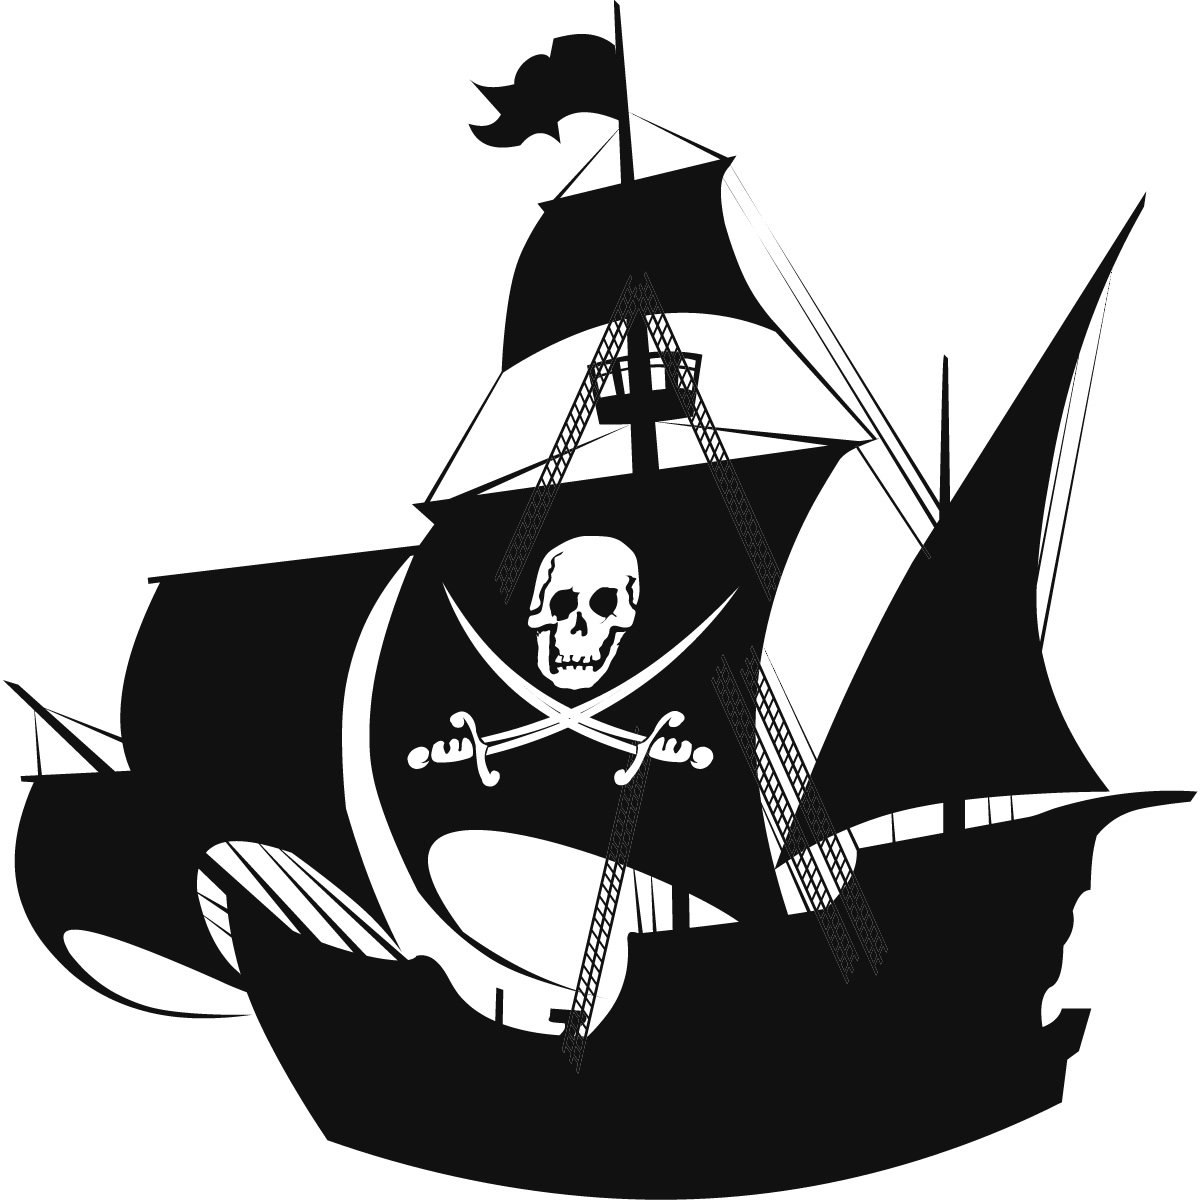 Pirate ship clipart black and white